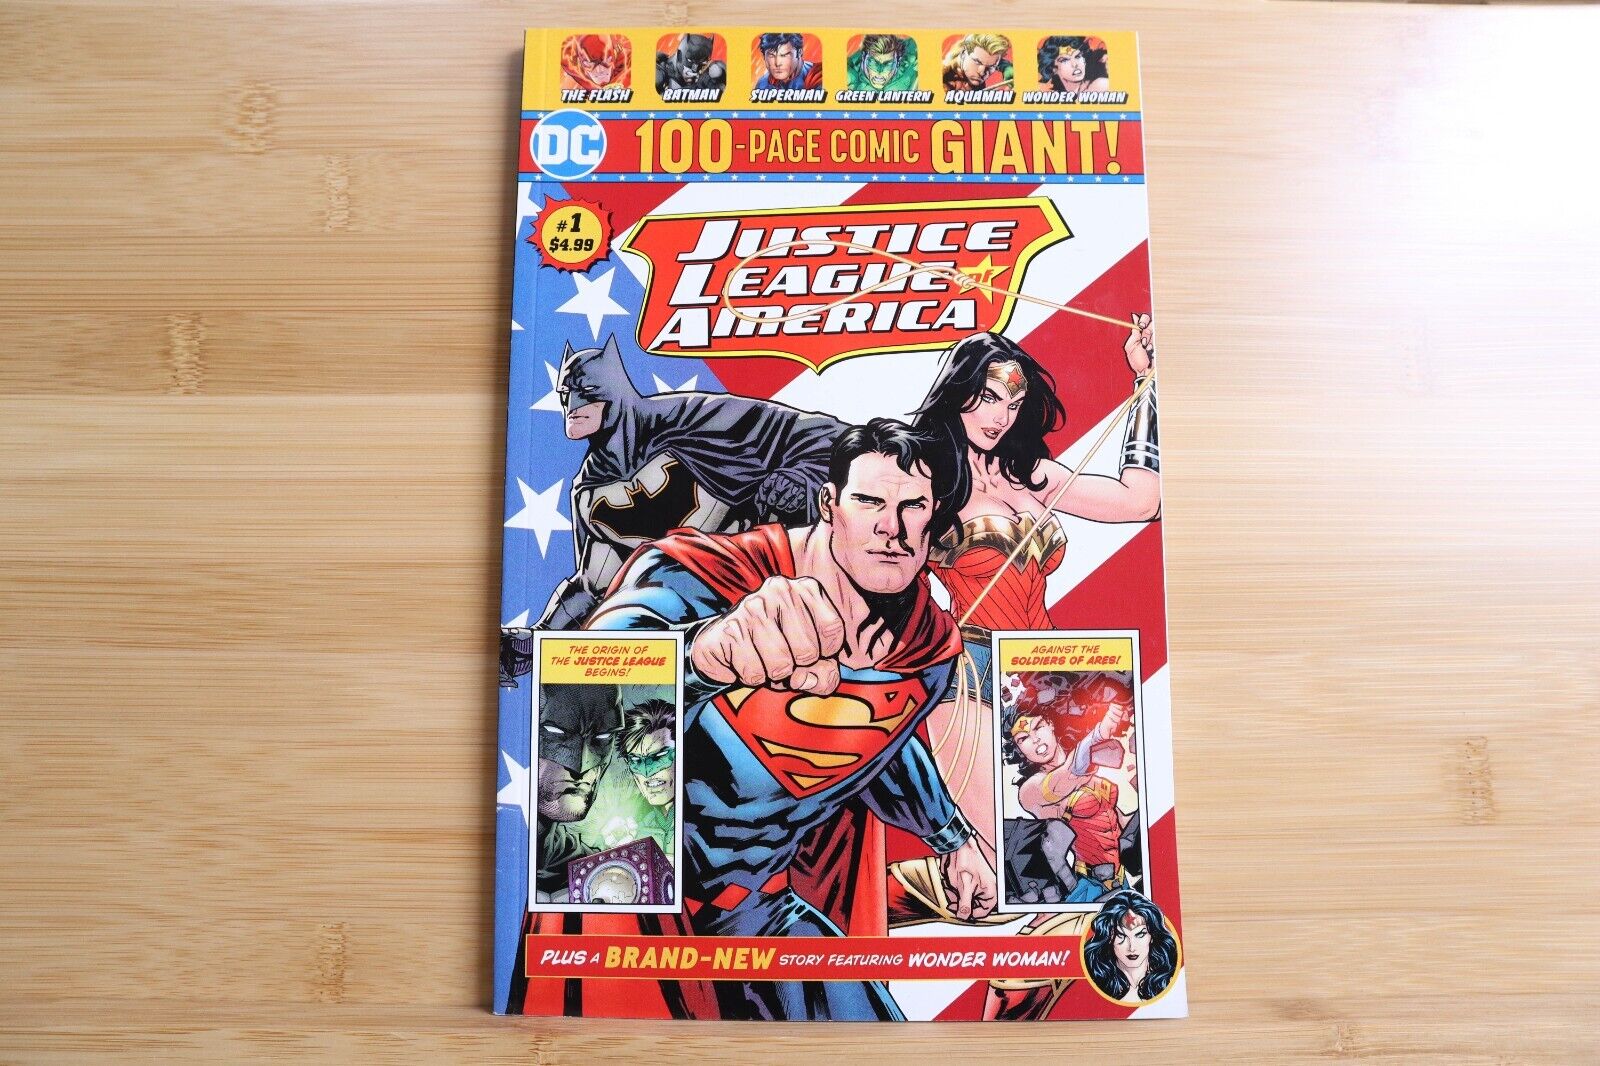 Justice League of America #1 100-Page Comic Giant DC Comics NM - 2018